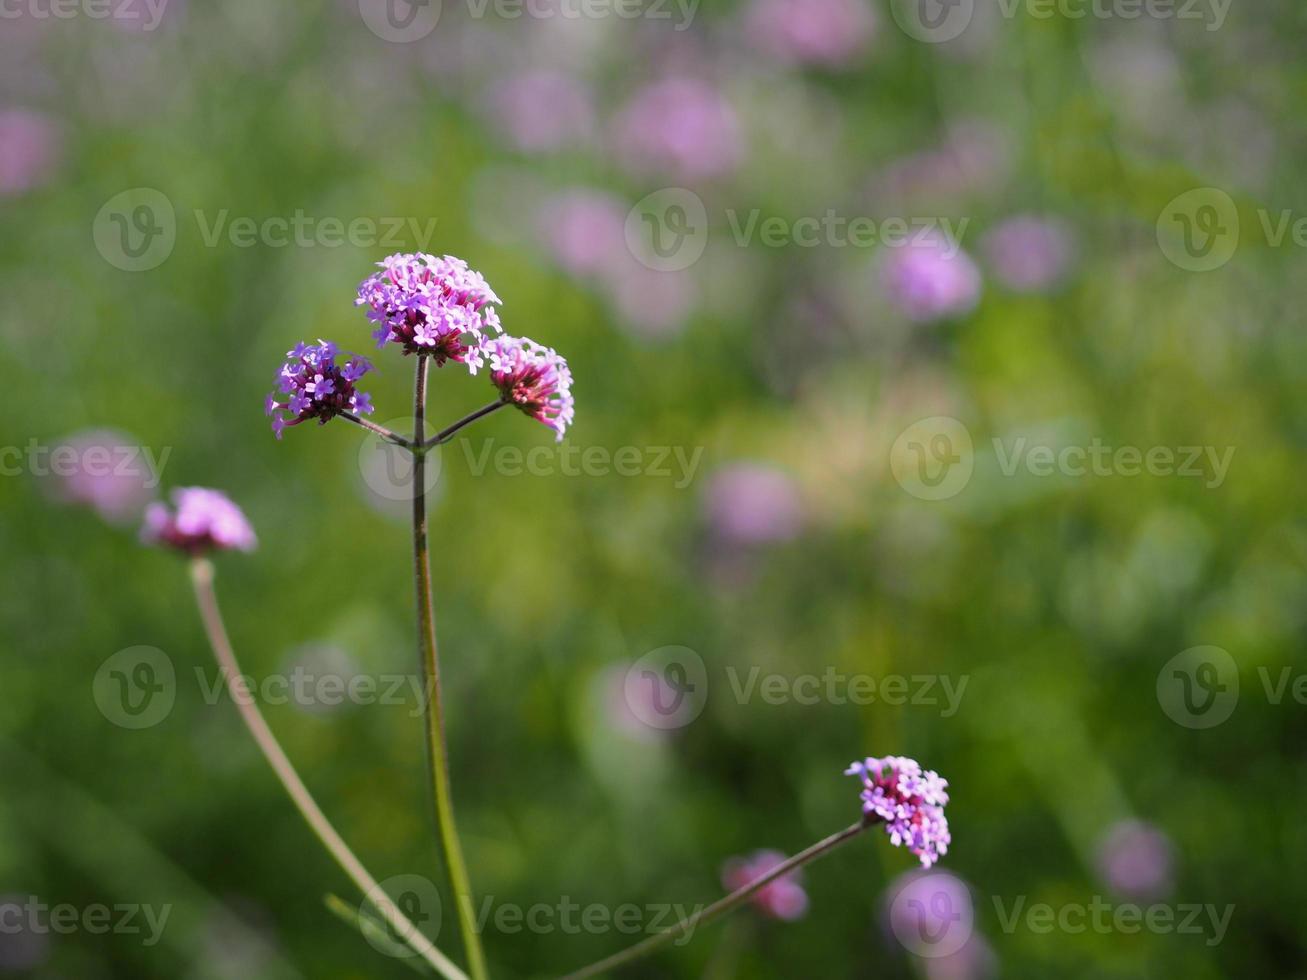 Verbena bouquet Small violet flower blooming in garden blurred of nature background, copy space concept for write text design in front background for banner, card, wallpaper, webpage photo